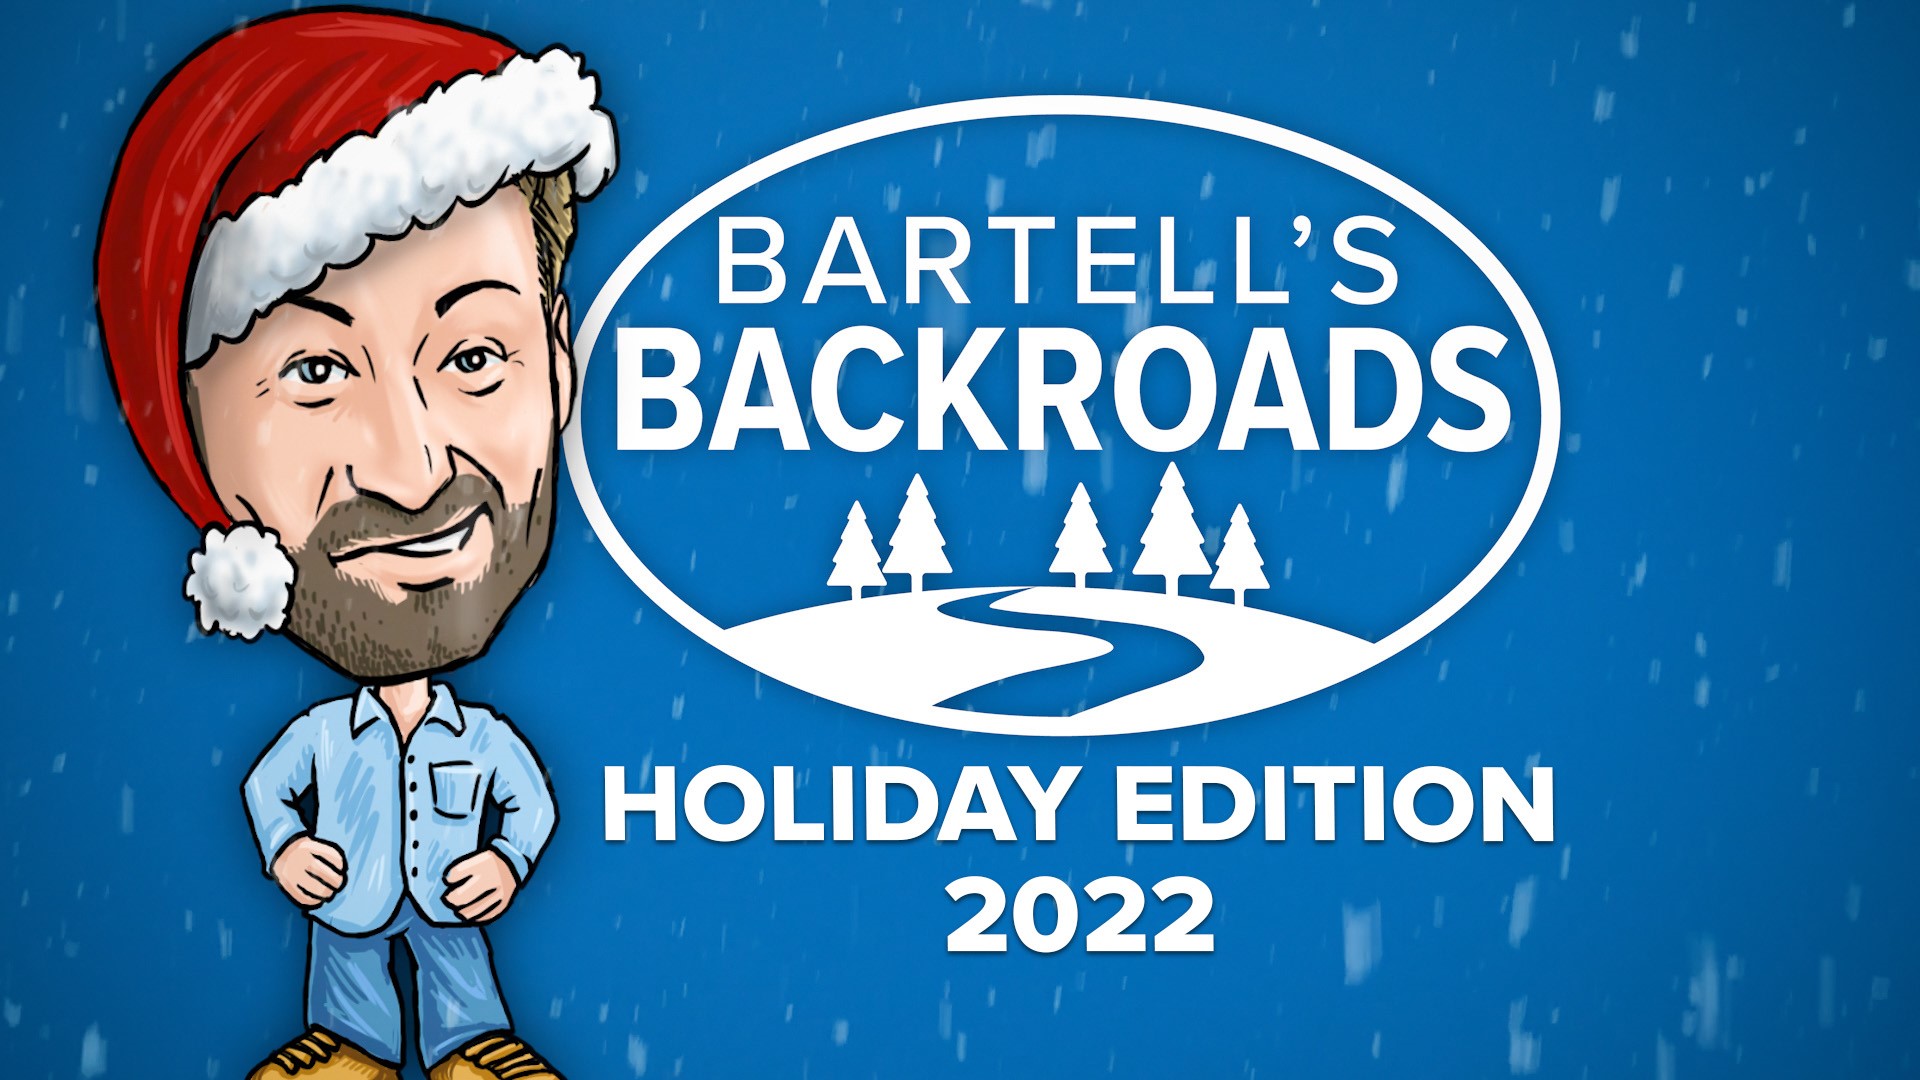 Nothing naughty, all nice! John Bartell lays out Northern California's top places to visit this winter in his 2022 Holiday special.